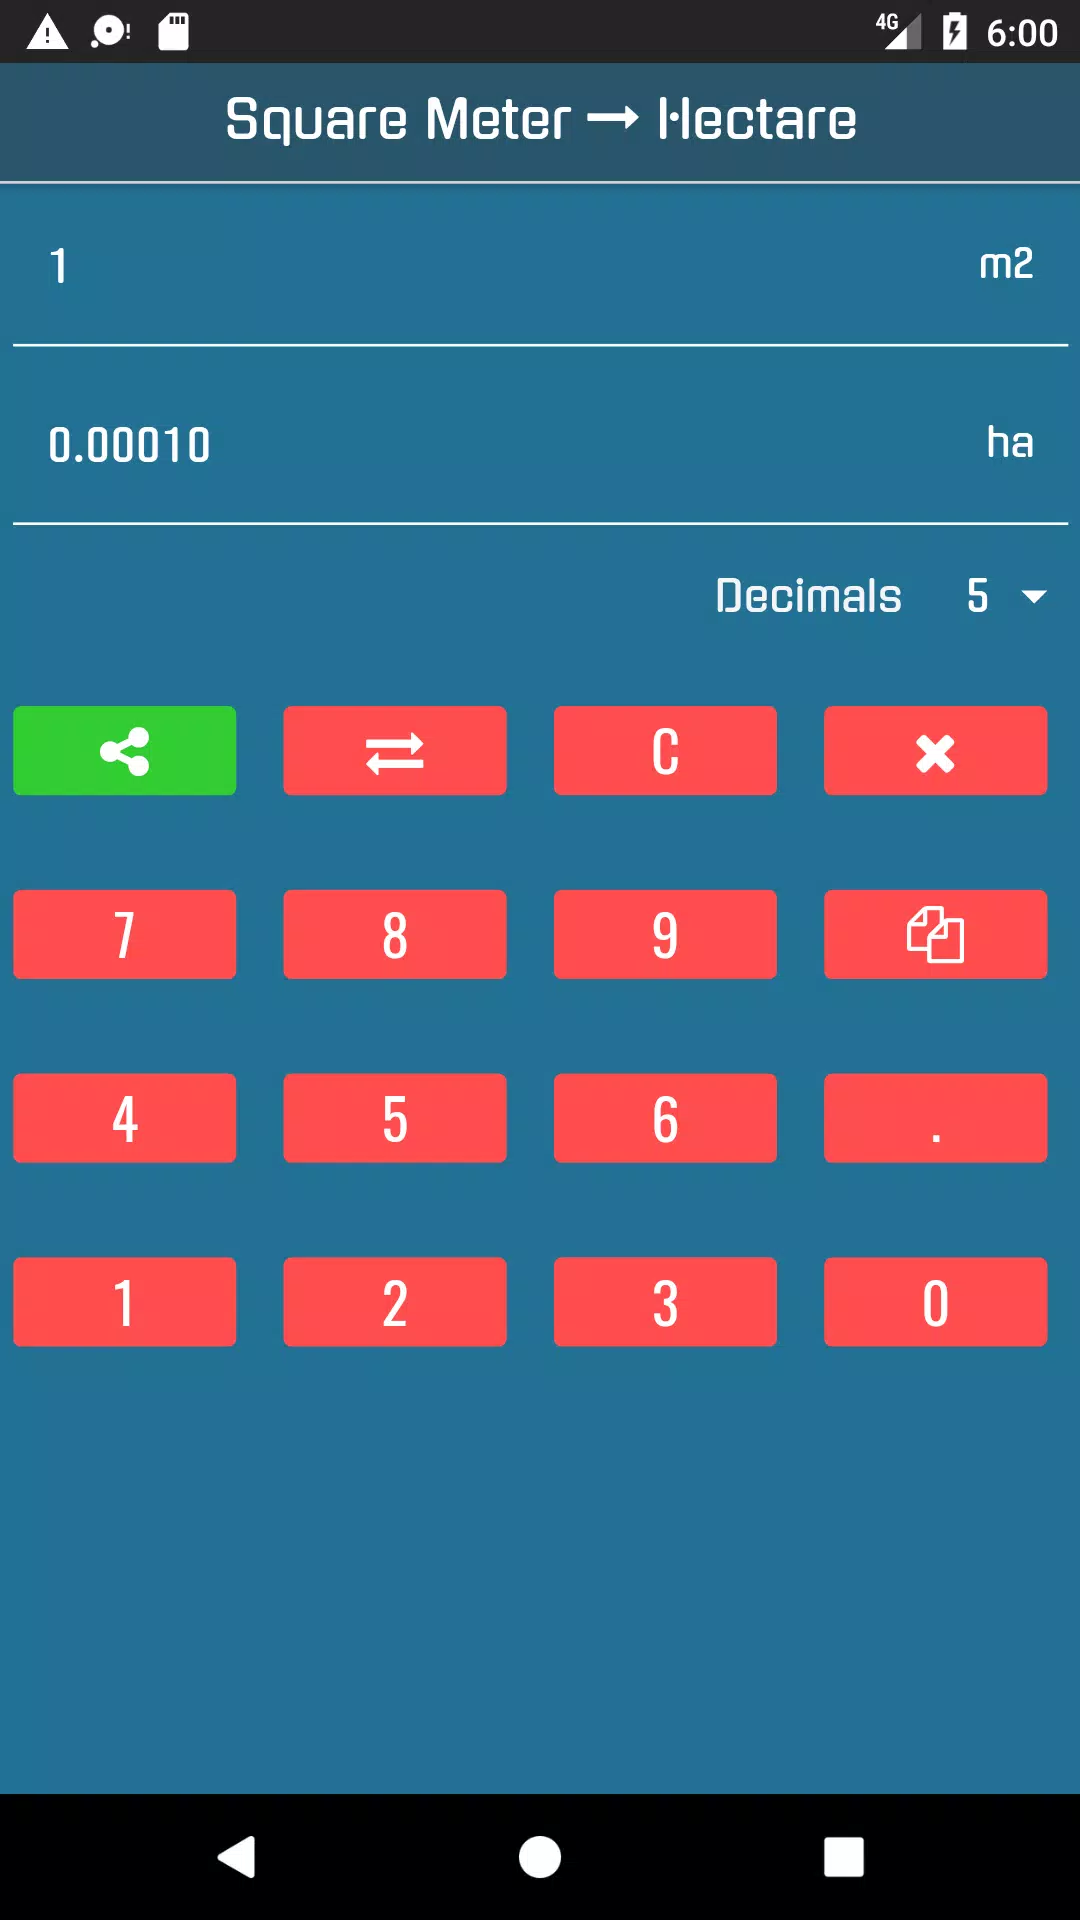 Square Meter to Hectare Converter for Android - APK Download